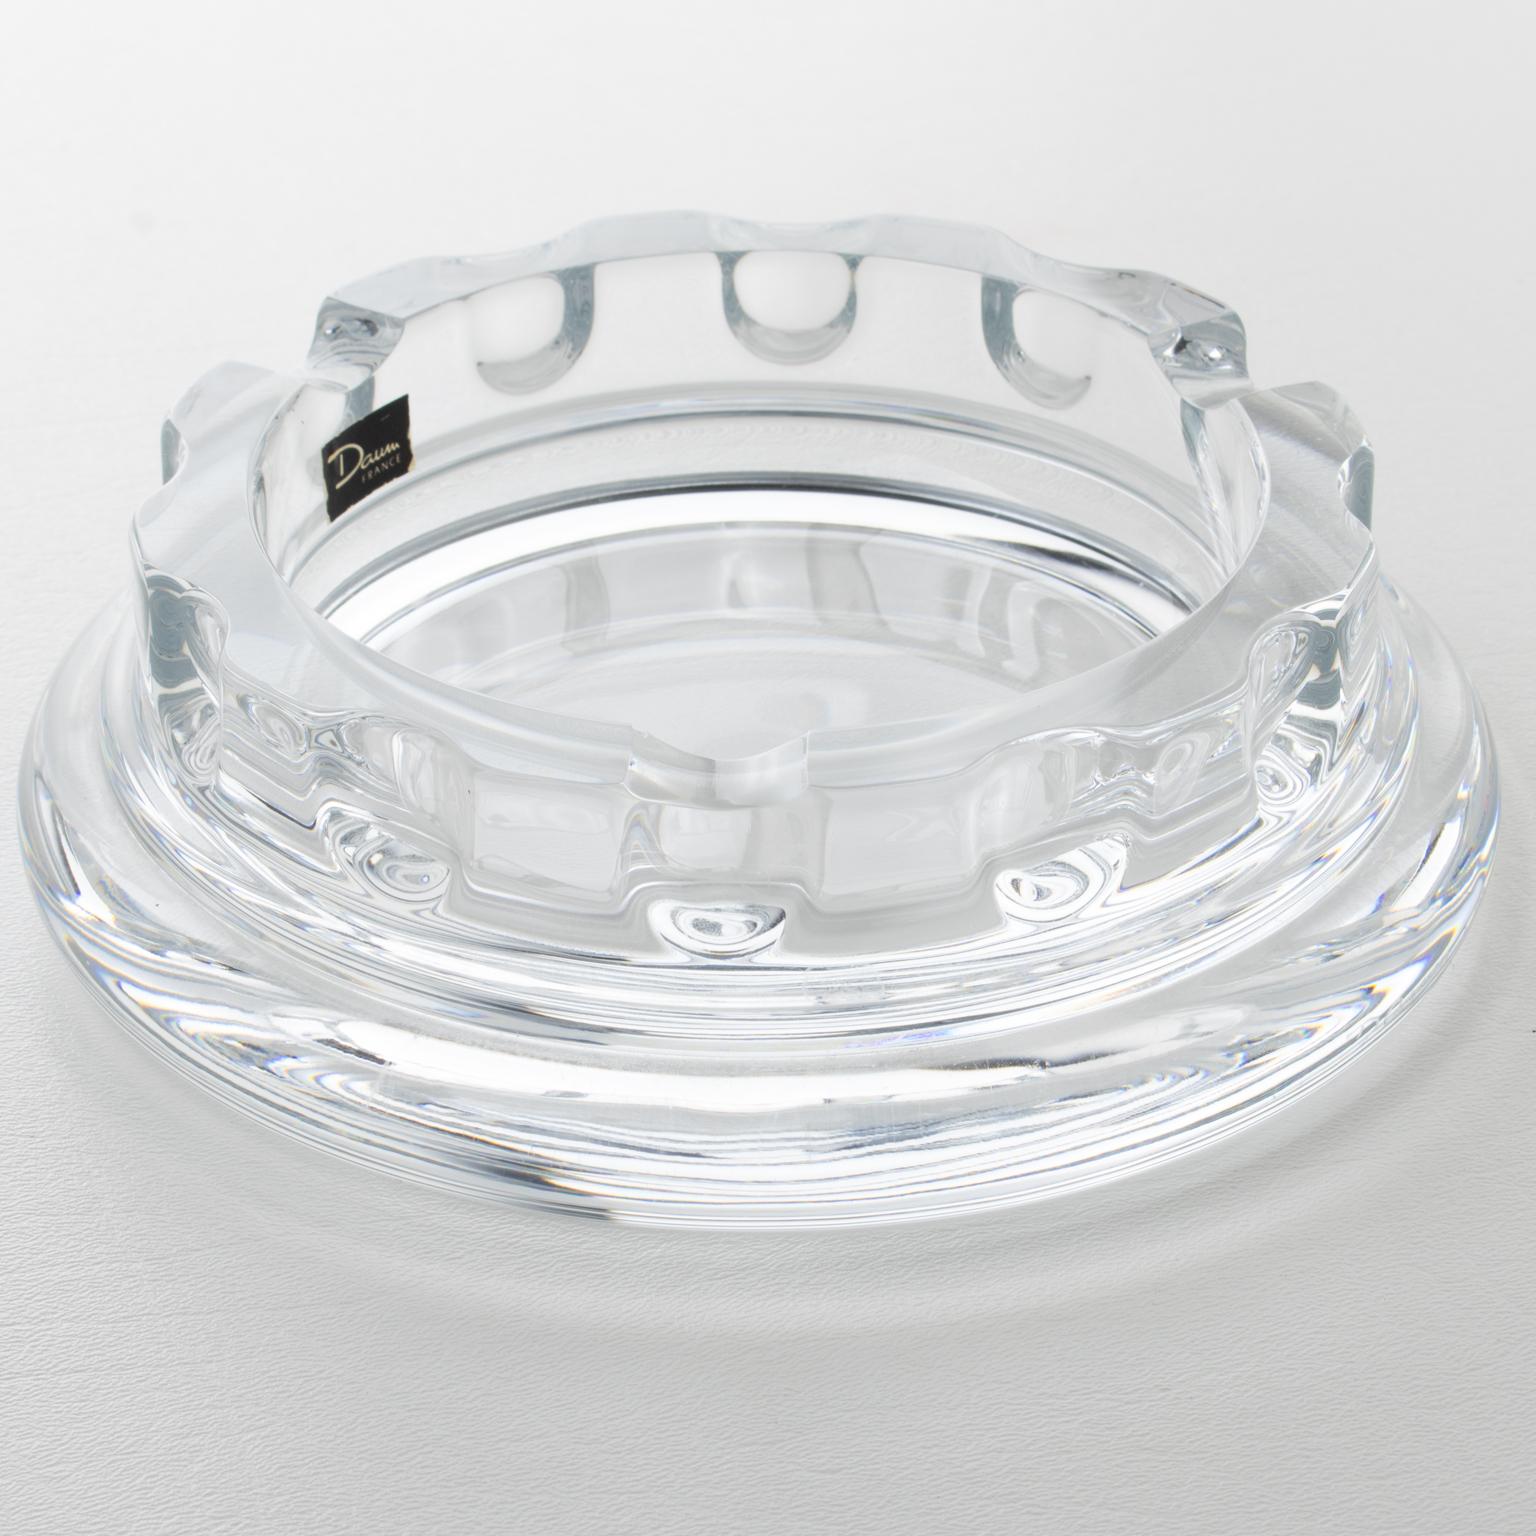 Daum France designed and crafted this elegant crystal cigar ashtray, catchall, or decorative bowl in the 1970s. The mouth-blown clear crystal is heavily carved with a round, weighty shape. The vide poche is marked on the side edge with the